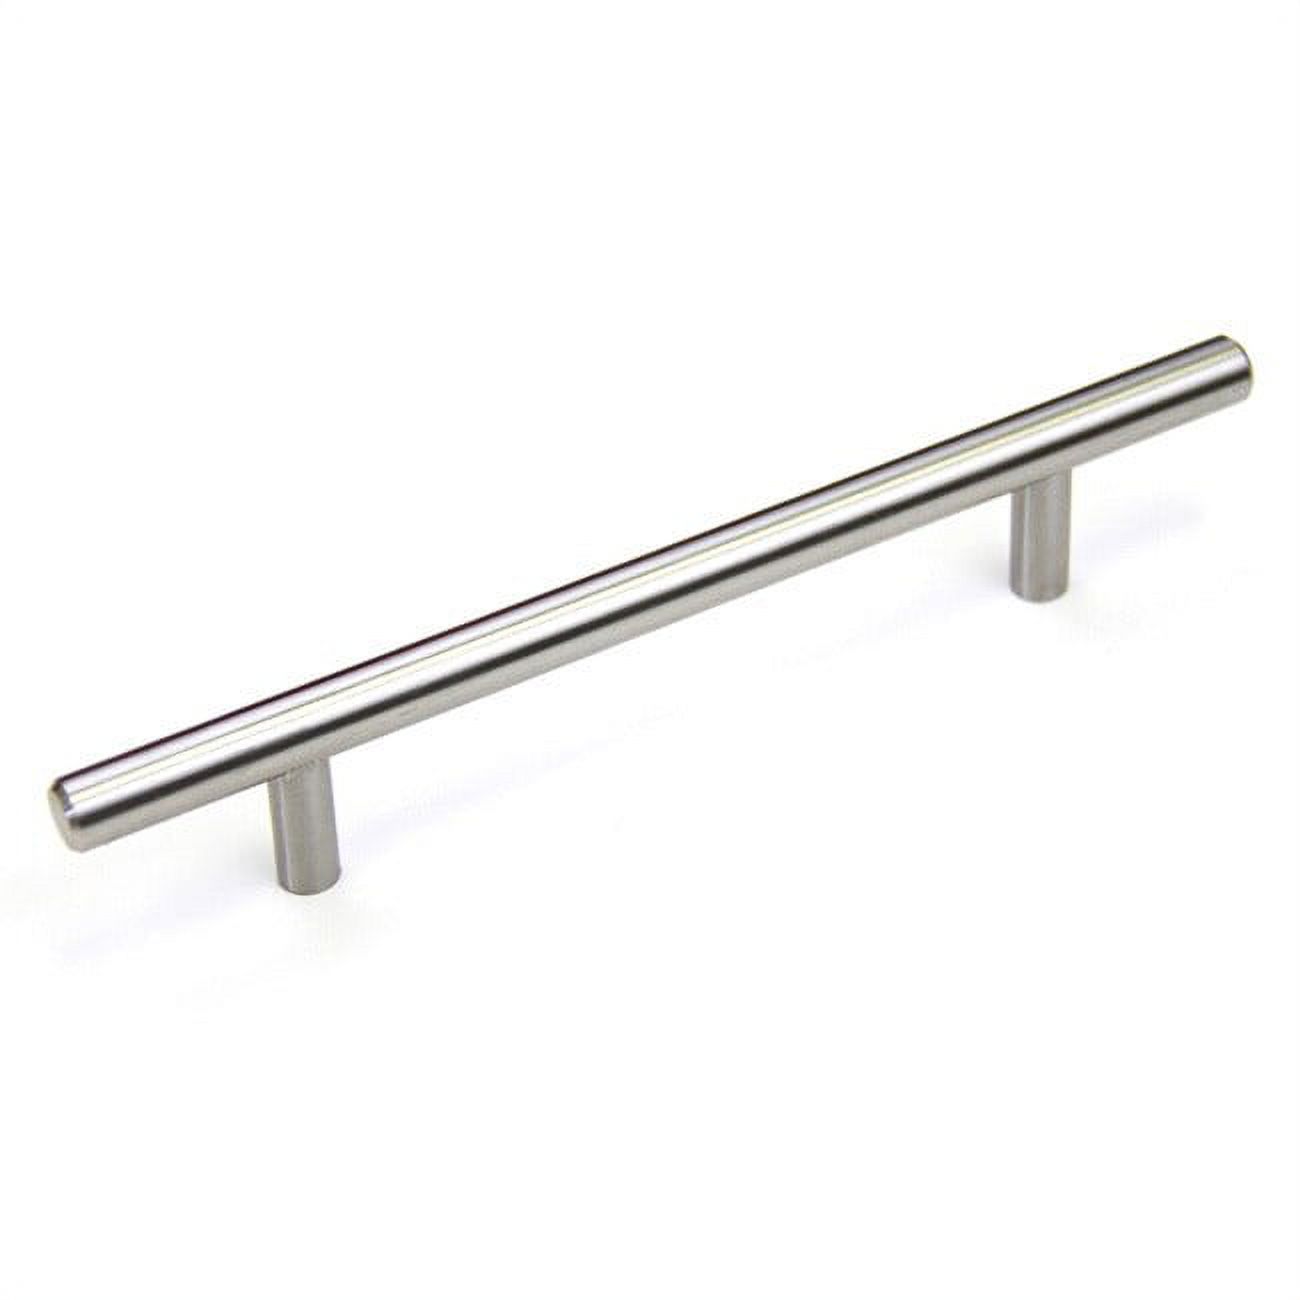 8" Solid Stainless Steel Cabinet Bar Pull Handles Stainless Steel 8-inch Cabinet Bar Pull Handles (Case of 15) - image 2 of 3